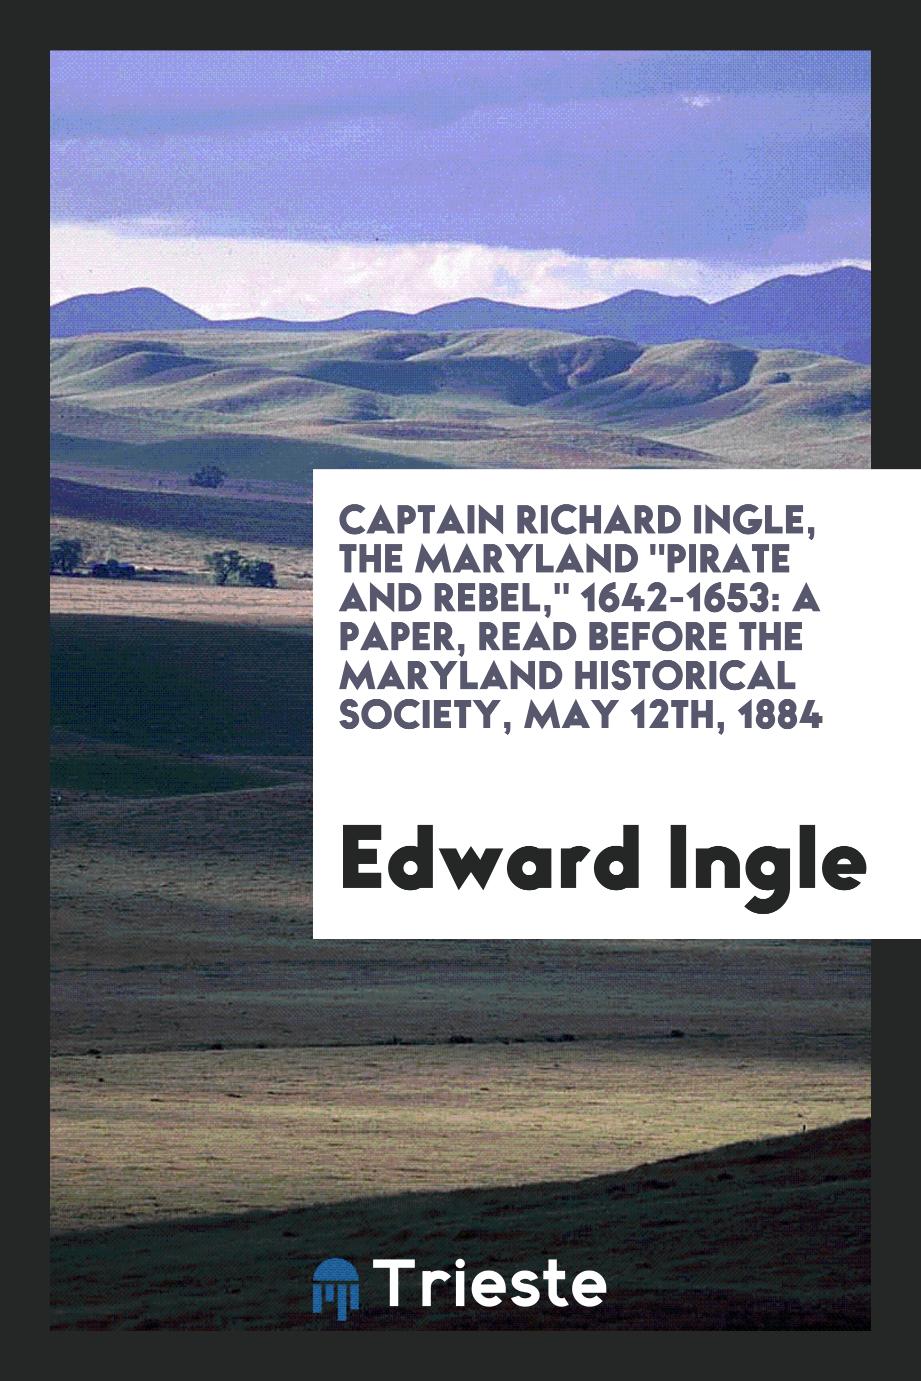 Captain Richard Ingle, the Maryland "Pirate and Rebel," 1642-1653: A Paper, read before the Maryland Historical Society, May 12th, 1884